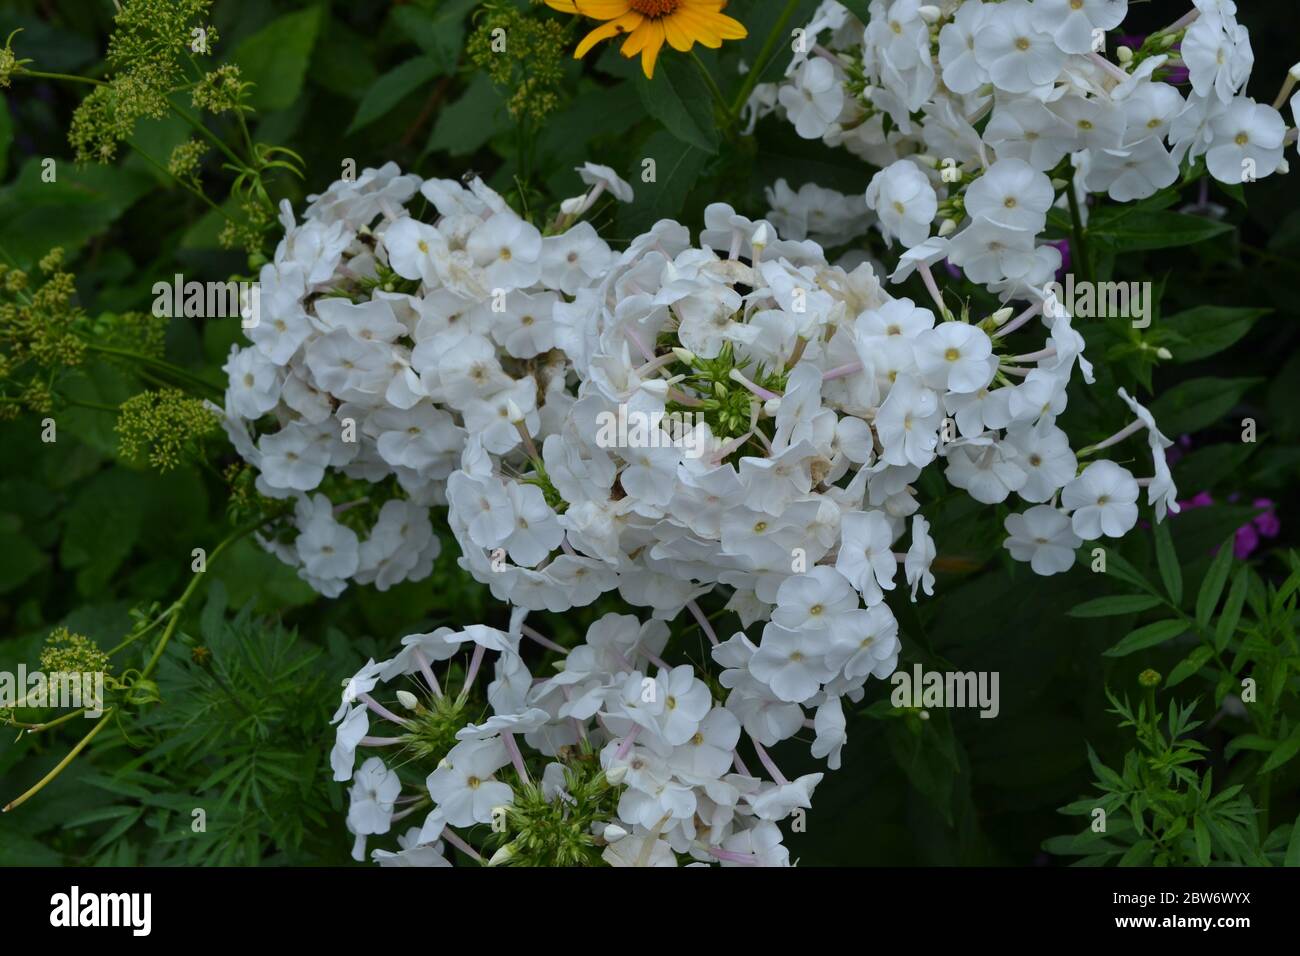 Green. Gardening. Home garden, flower bed. Beautiful. Phlox flower. Perennial herbaceous plant. High branches. White flowers Stock Photo